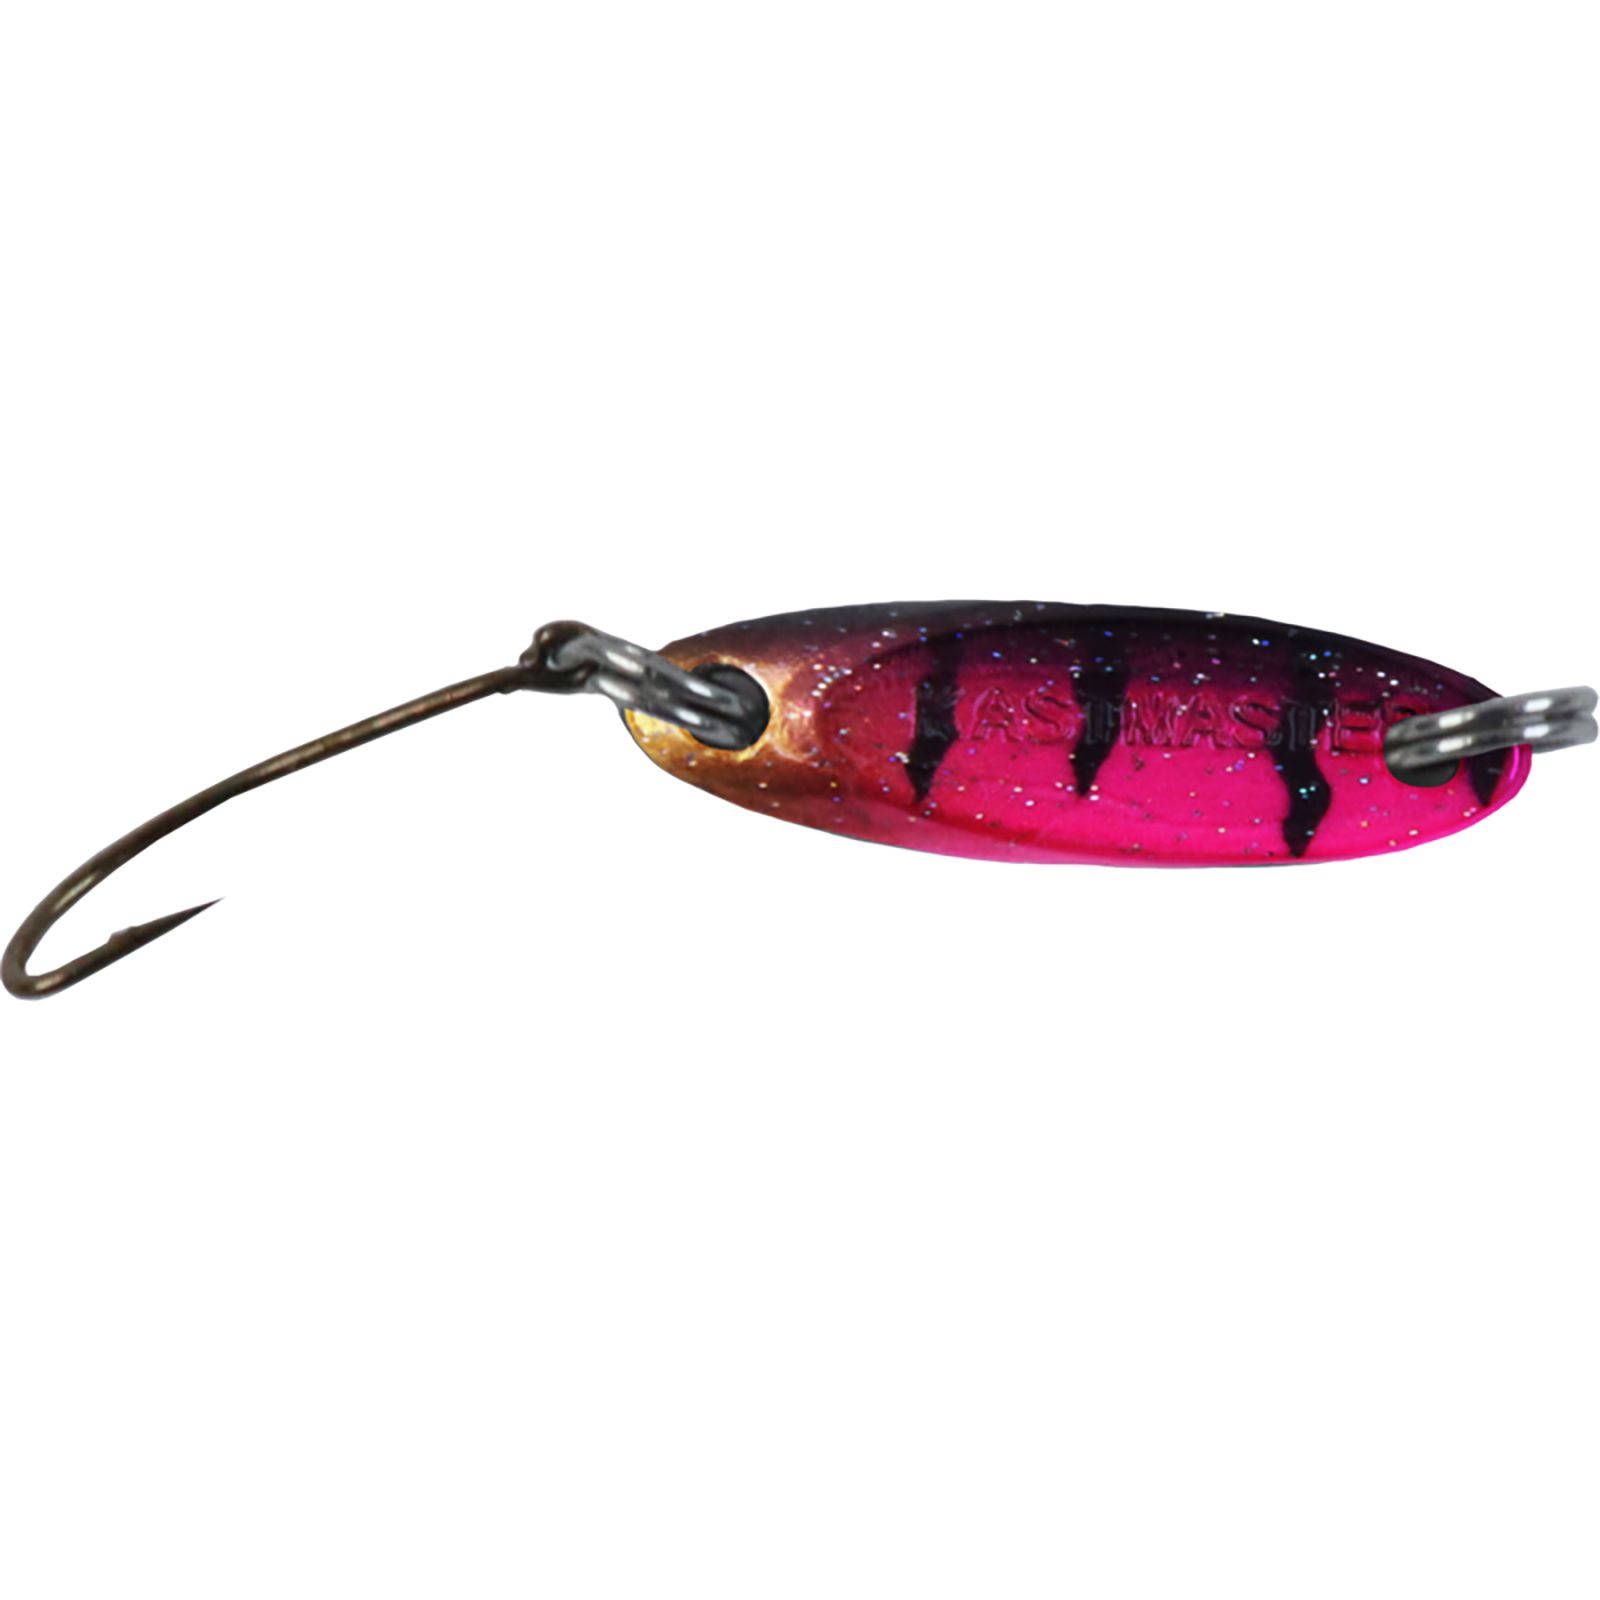 Acme Tackle Micro Kastmaster Tungsten - 1/28 oz. - Glow Atomic Perch